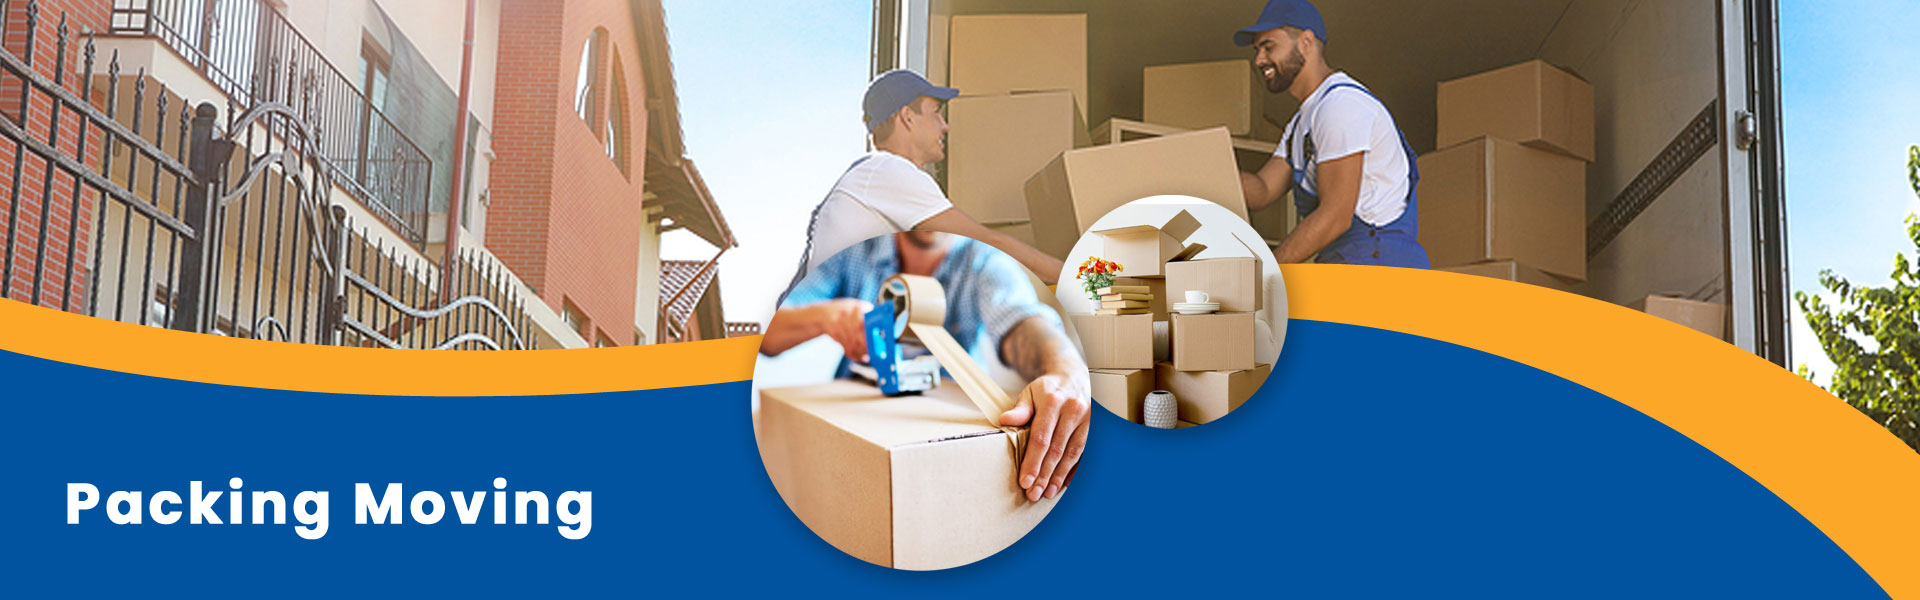 Packing Moving Service